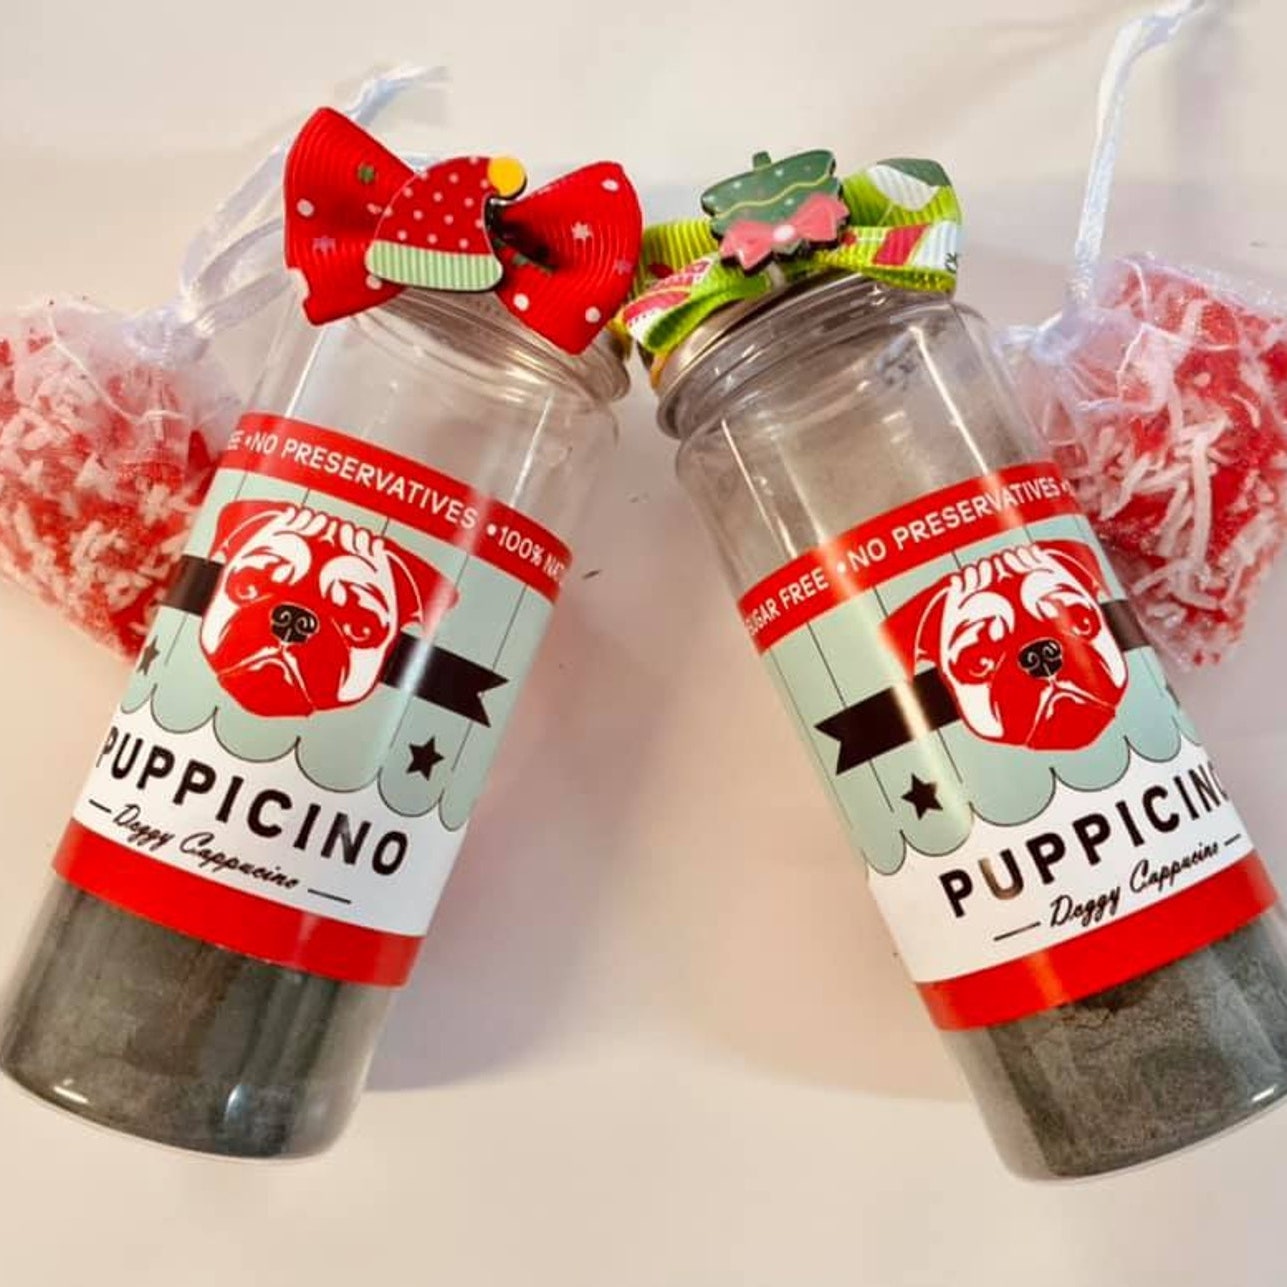 L'BARKERY - Puppicino Special Christmas Edition Single Shot with Sprinkles